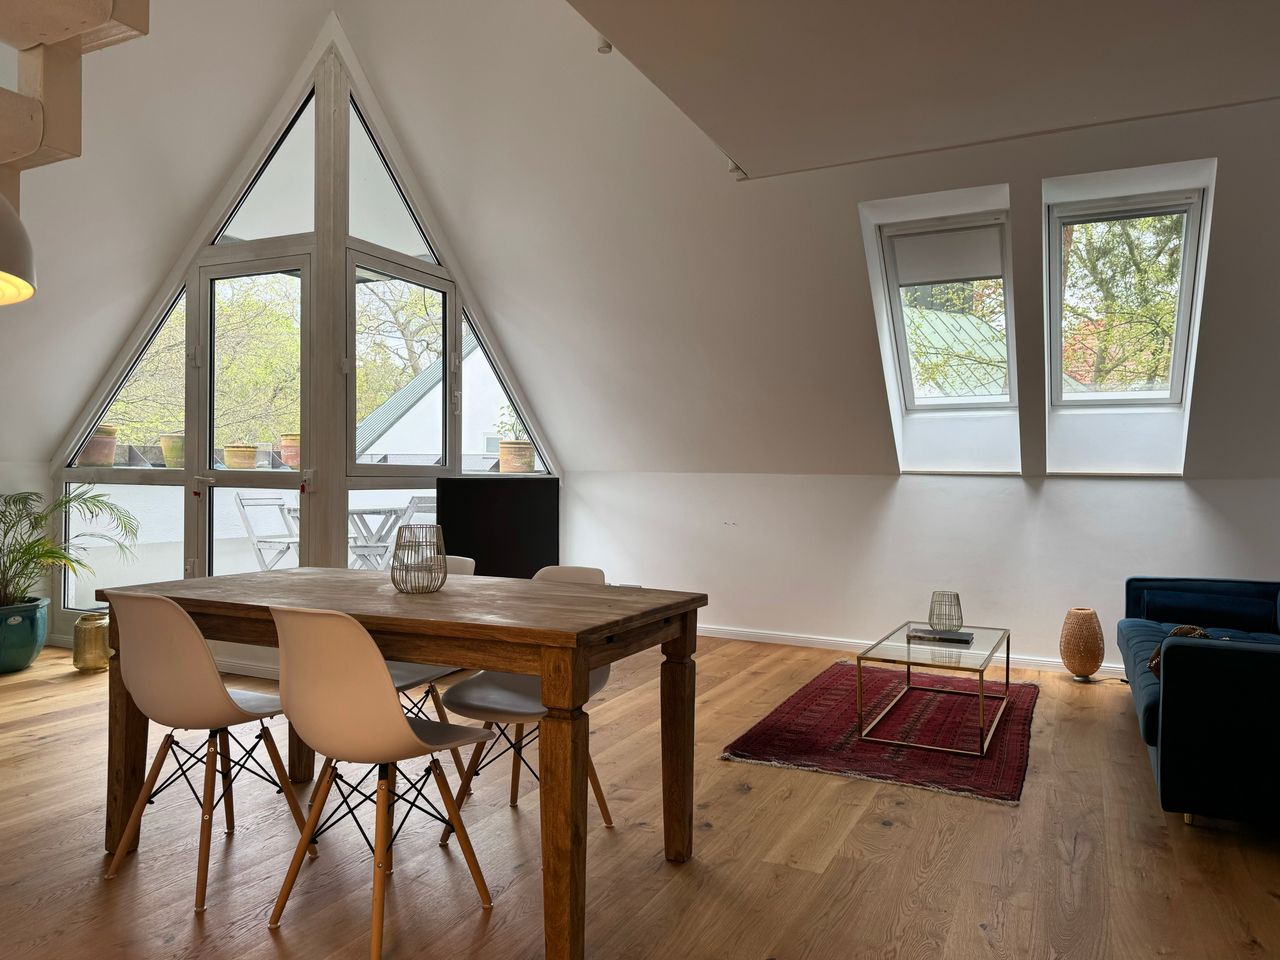 Fantastic maisonette apartment in the heart of the Grunewald